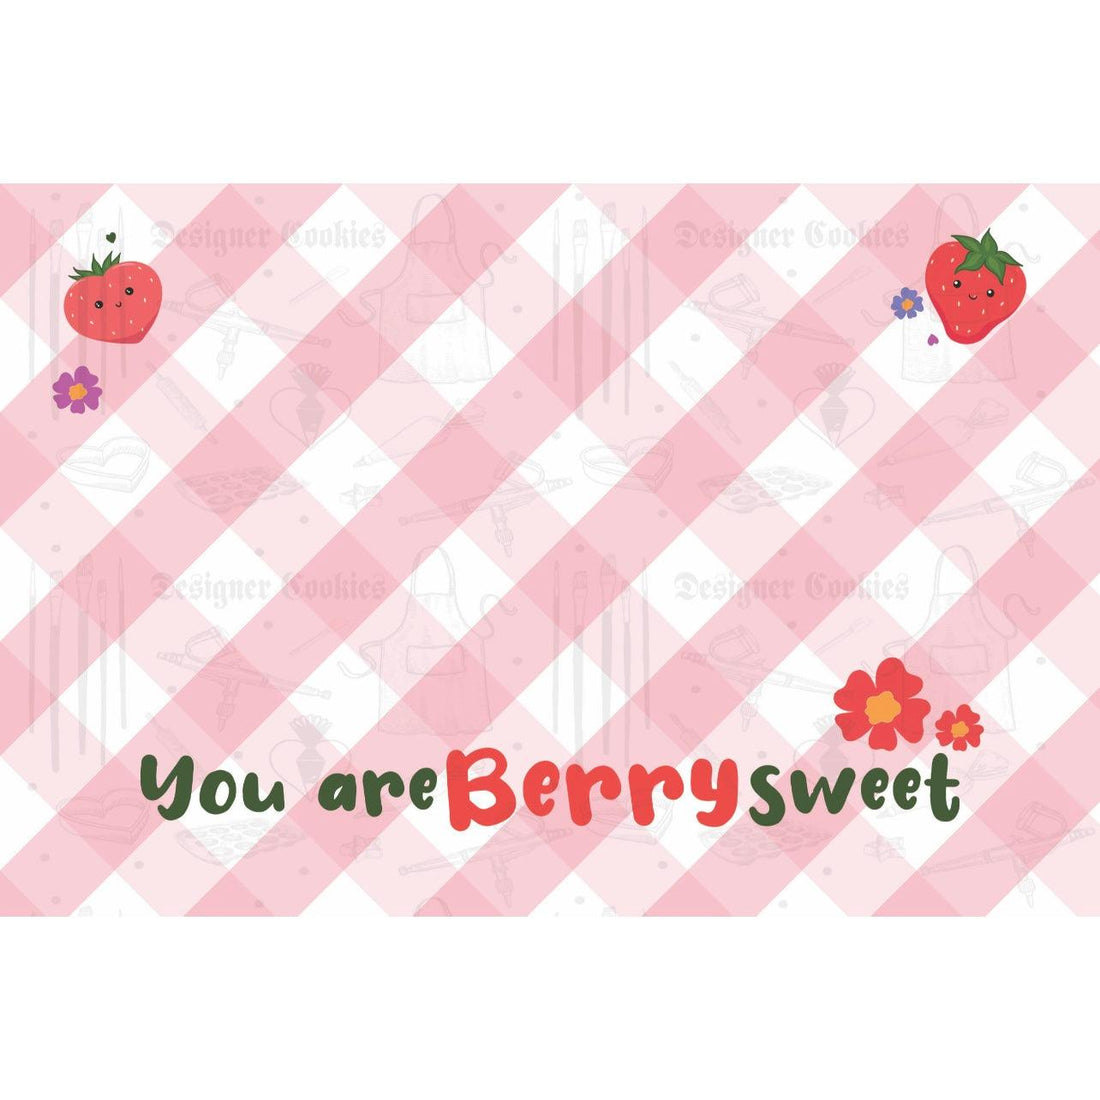 "You Are Berry Sweet" Physical Cookie Card - Designer Cookies ™ STUDIO